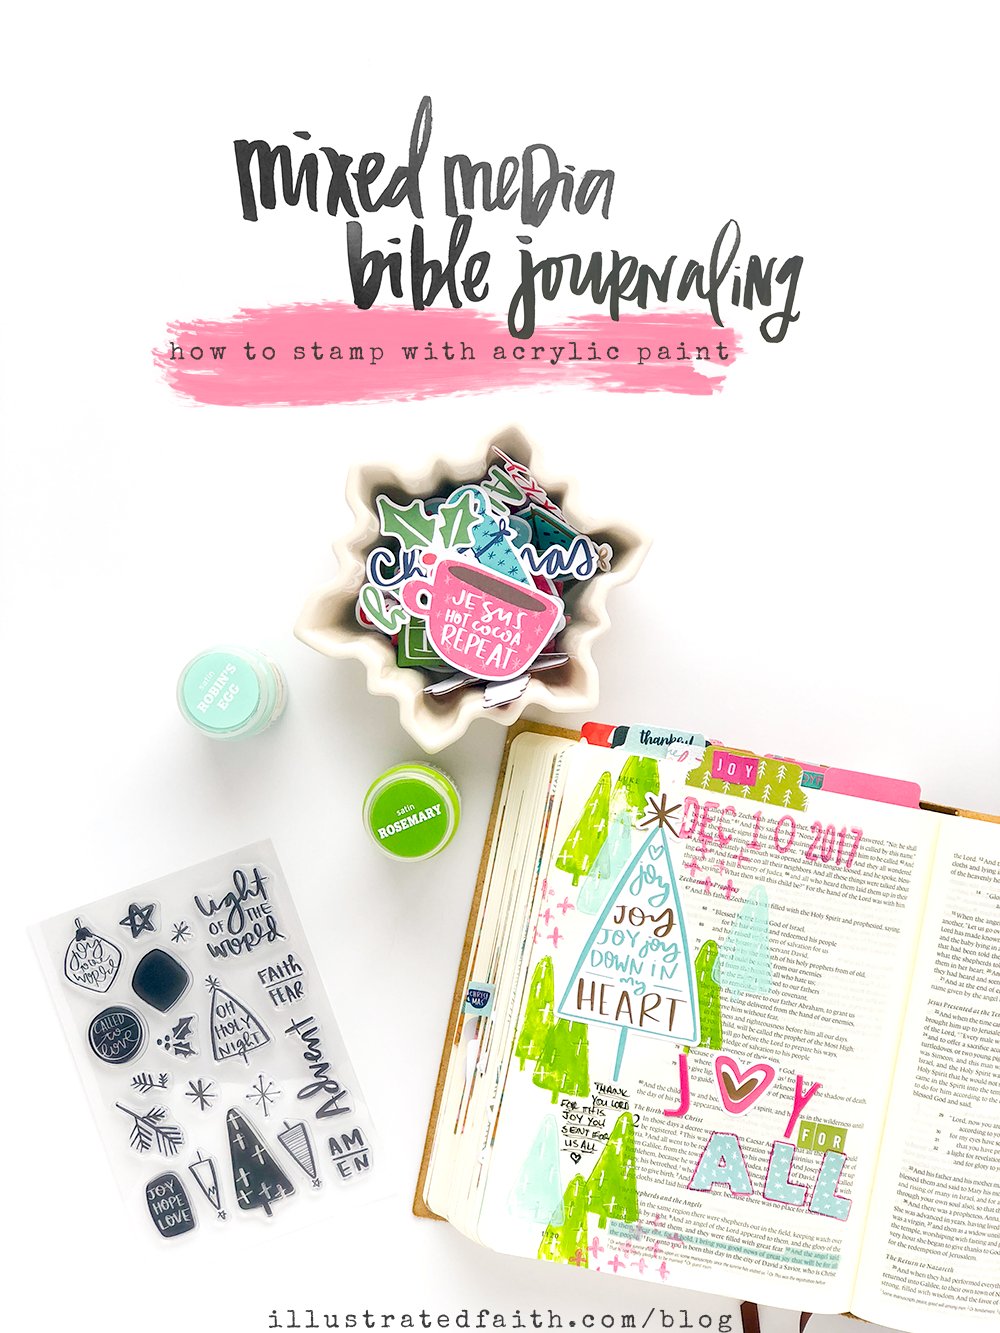 mixed media Bible journaling tutorial by Heather Greenwood | Luke 2:10 Advent Bible journaling | stamping with acrylic paints